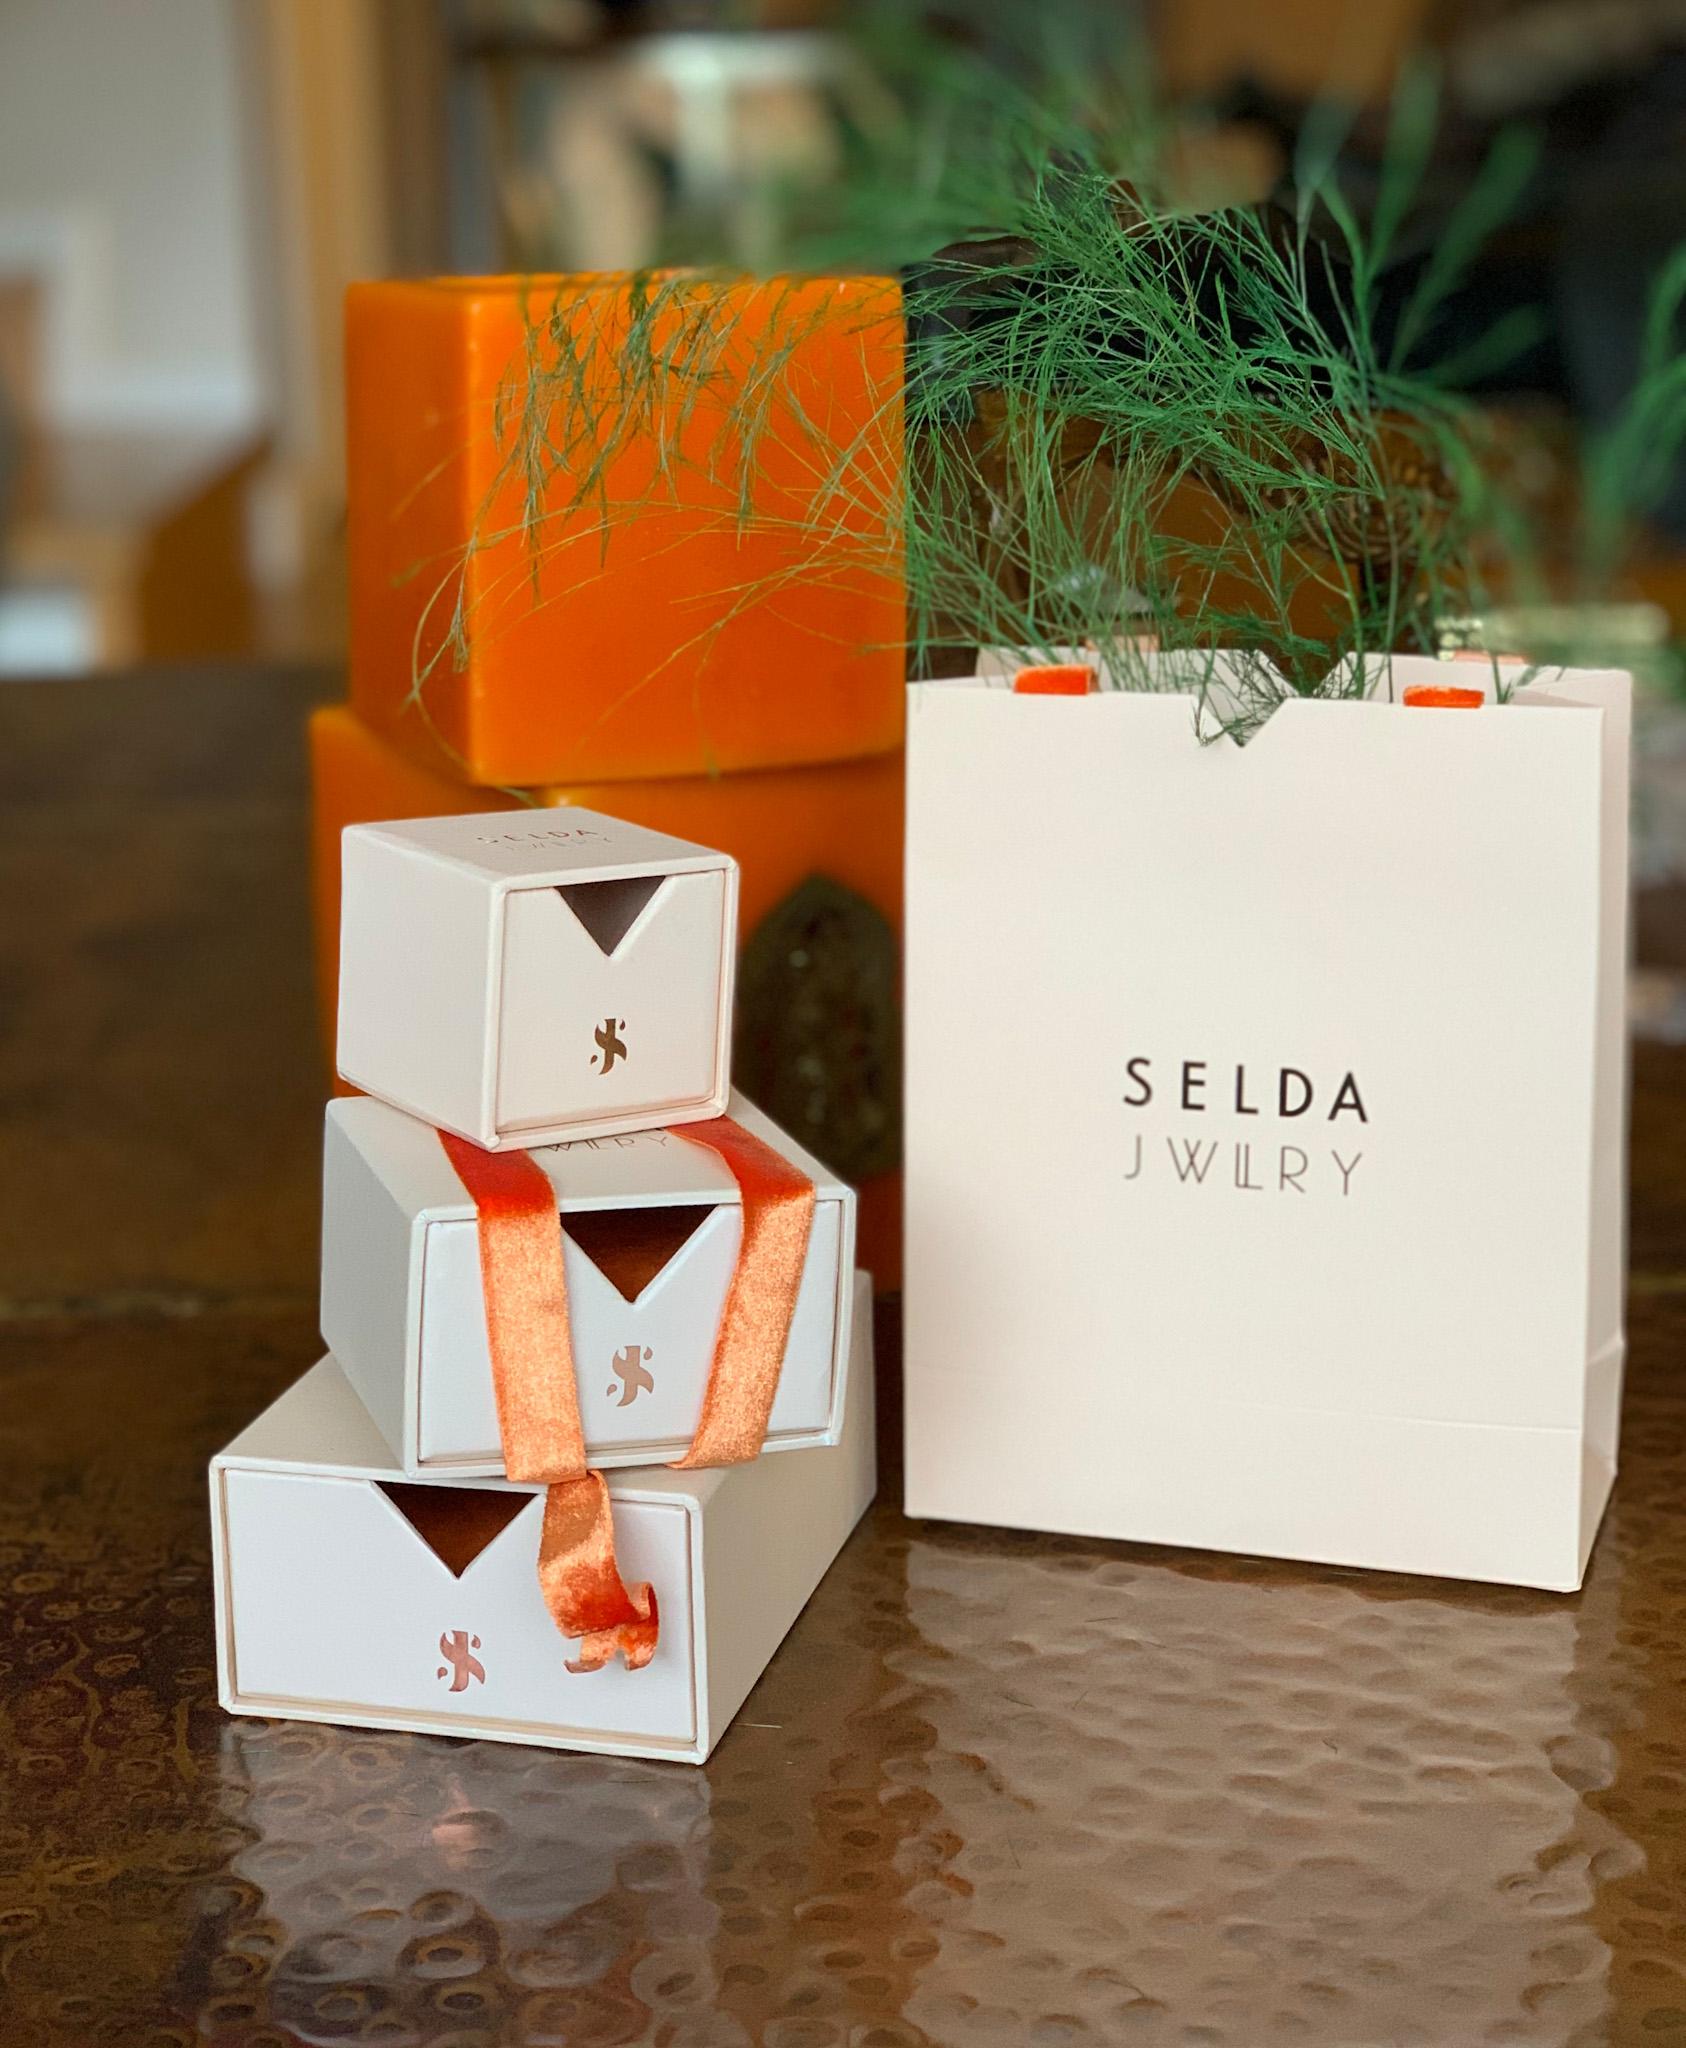 Smoky quartz rain drop necklace in 14k rose gold by Selda Jewellery

Additional Information:-
Collection: Waves Collection
14k Rose gold
0.14ct Smoky quartz
Pendant height 2cm
Chain length 40 cm